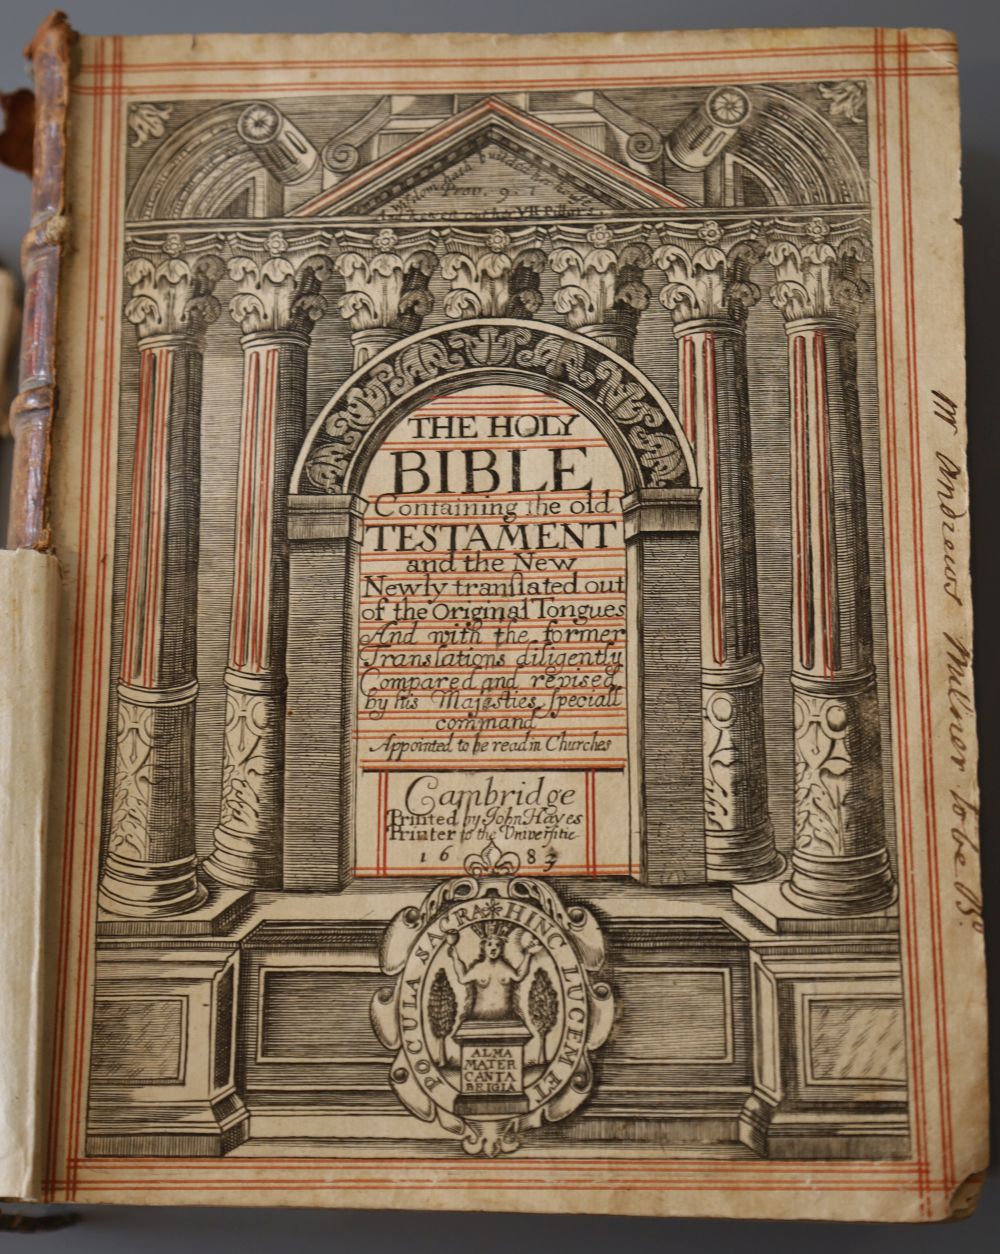 The Bible in English - The Holy Bible, engraved architectural title page, by John Chantrey, with date altered from 1682, include Apochr